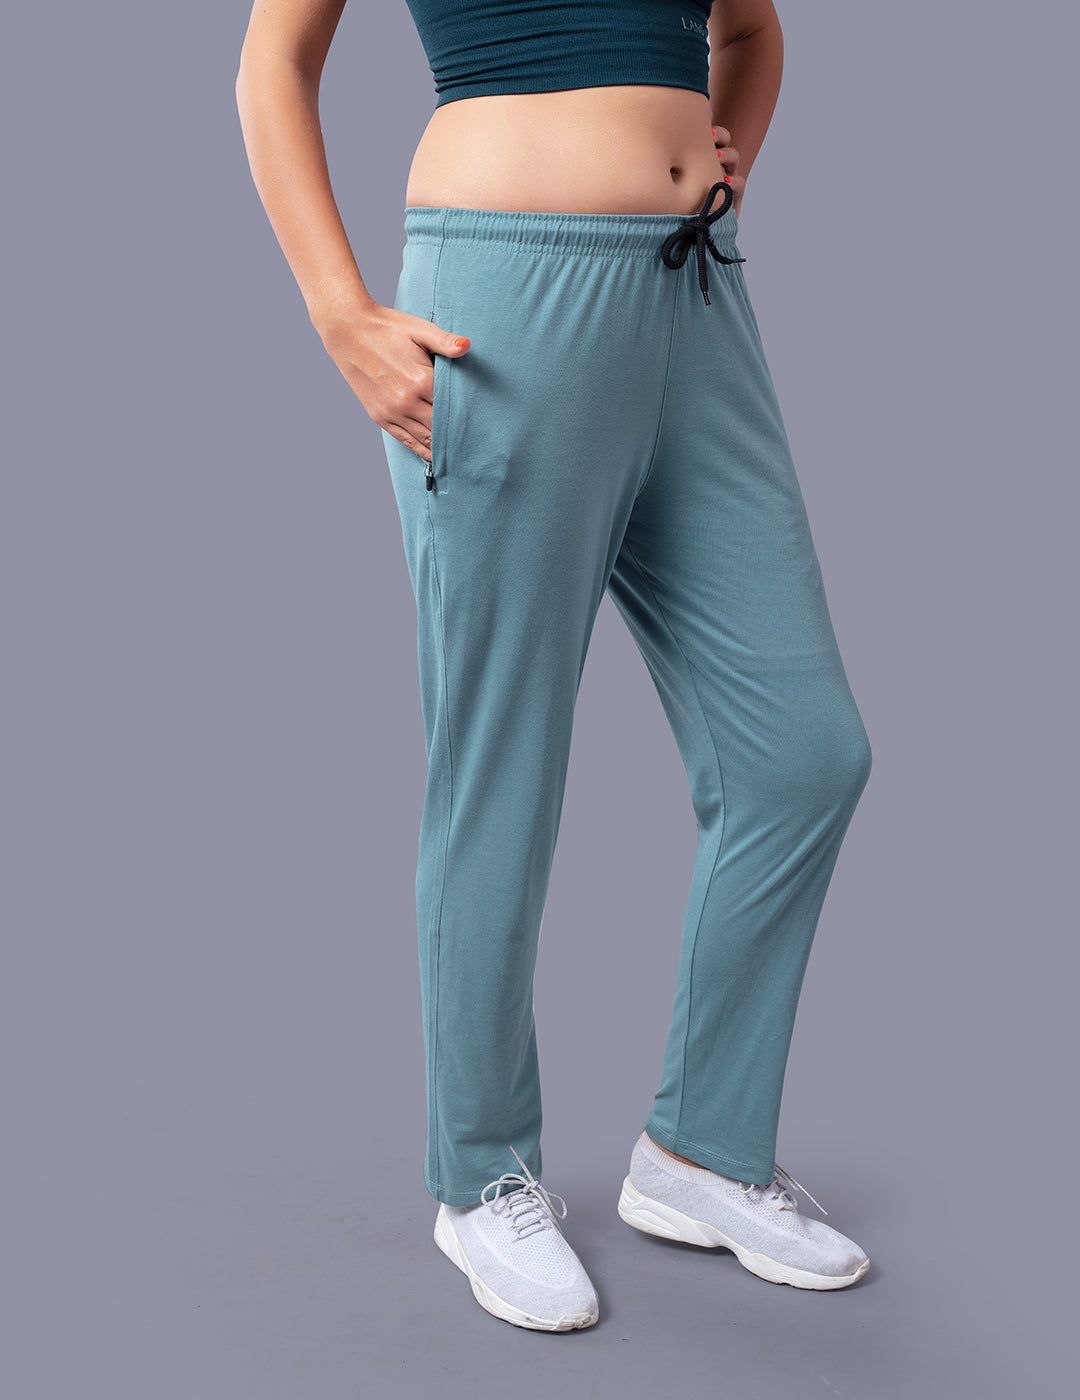 Cotton Sweat Pants CUFFED AT ANKLE Unisex Cotton Sweat Pants by Thousand  Mile